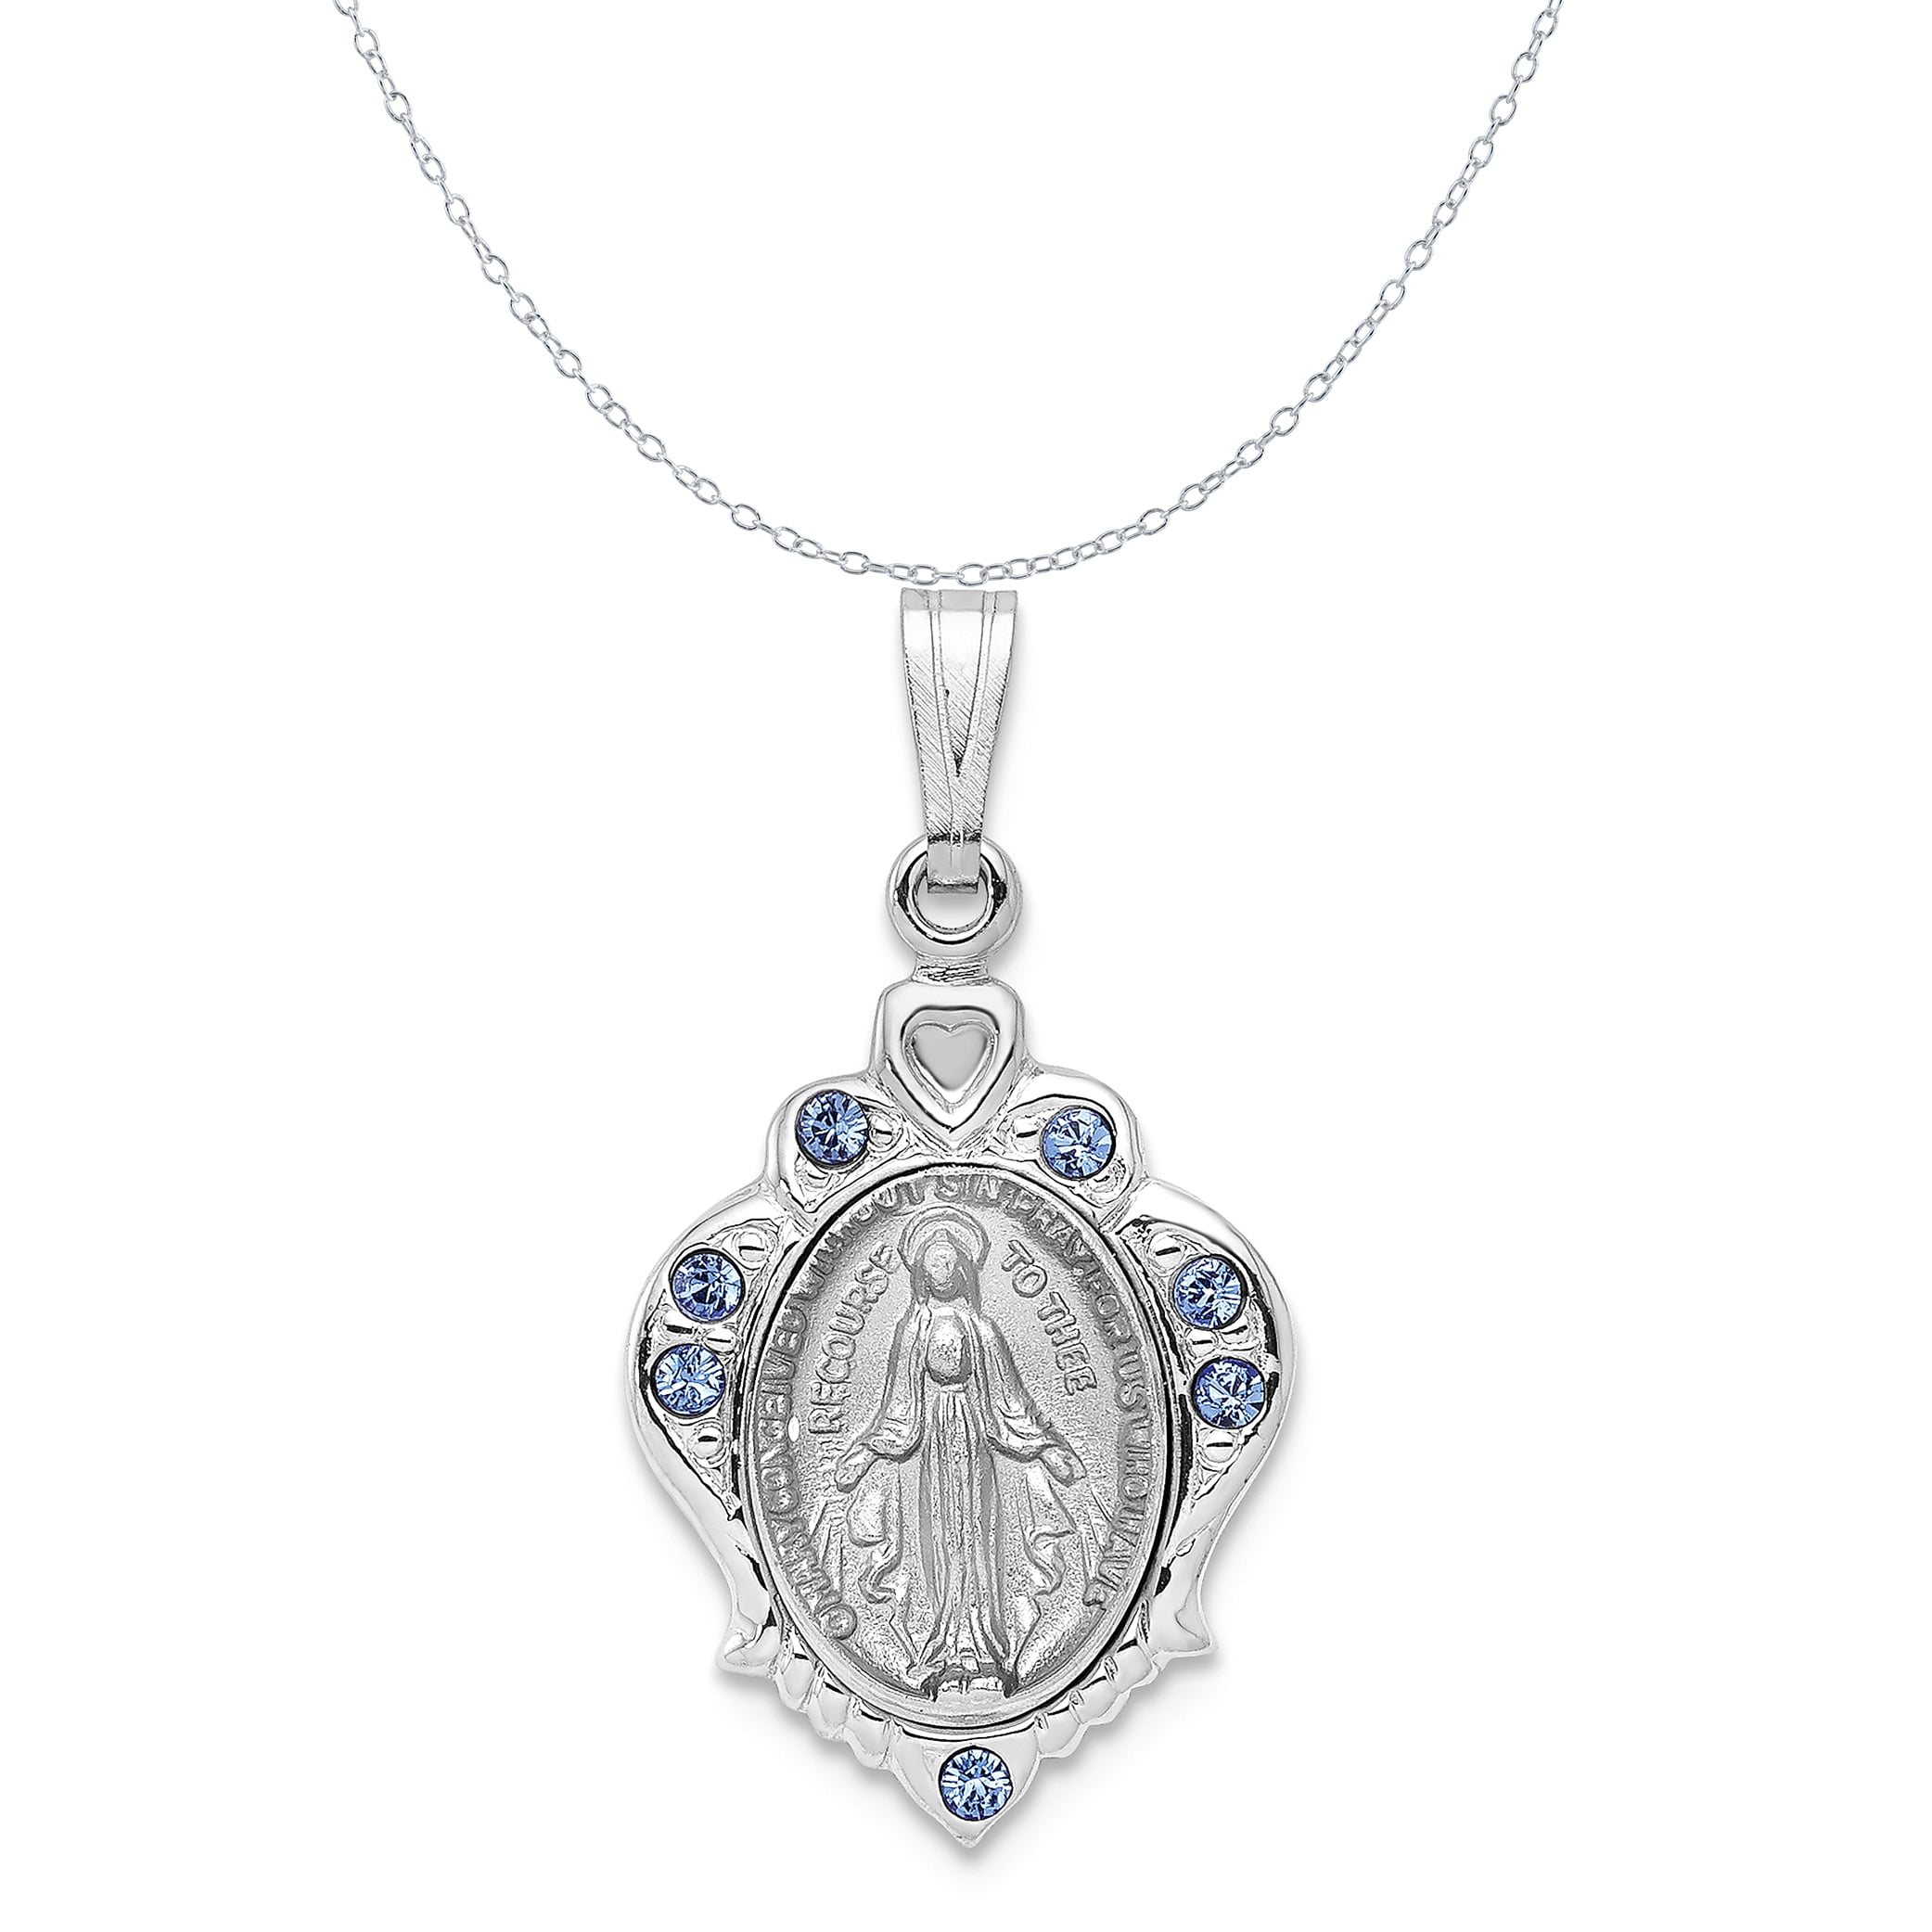 18-Inch Rhodium Plated Necklace with 4mm Topaz Birthstone Beads and Sterling Silver Saint Nino de Atocha Charm.